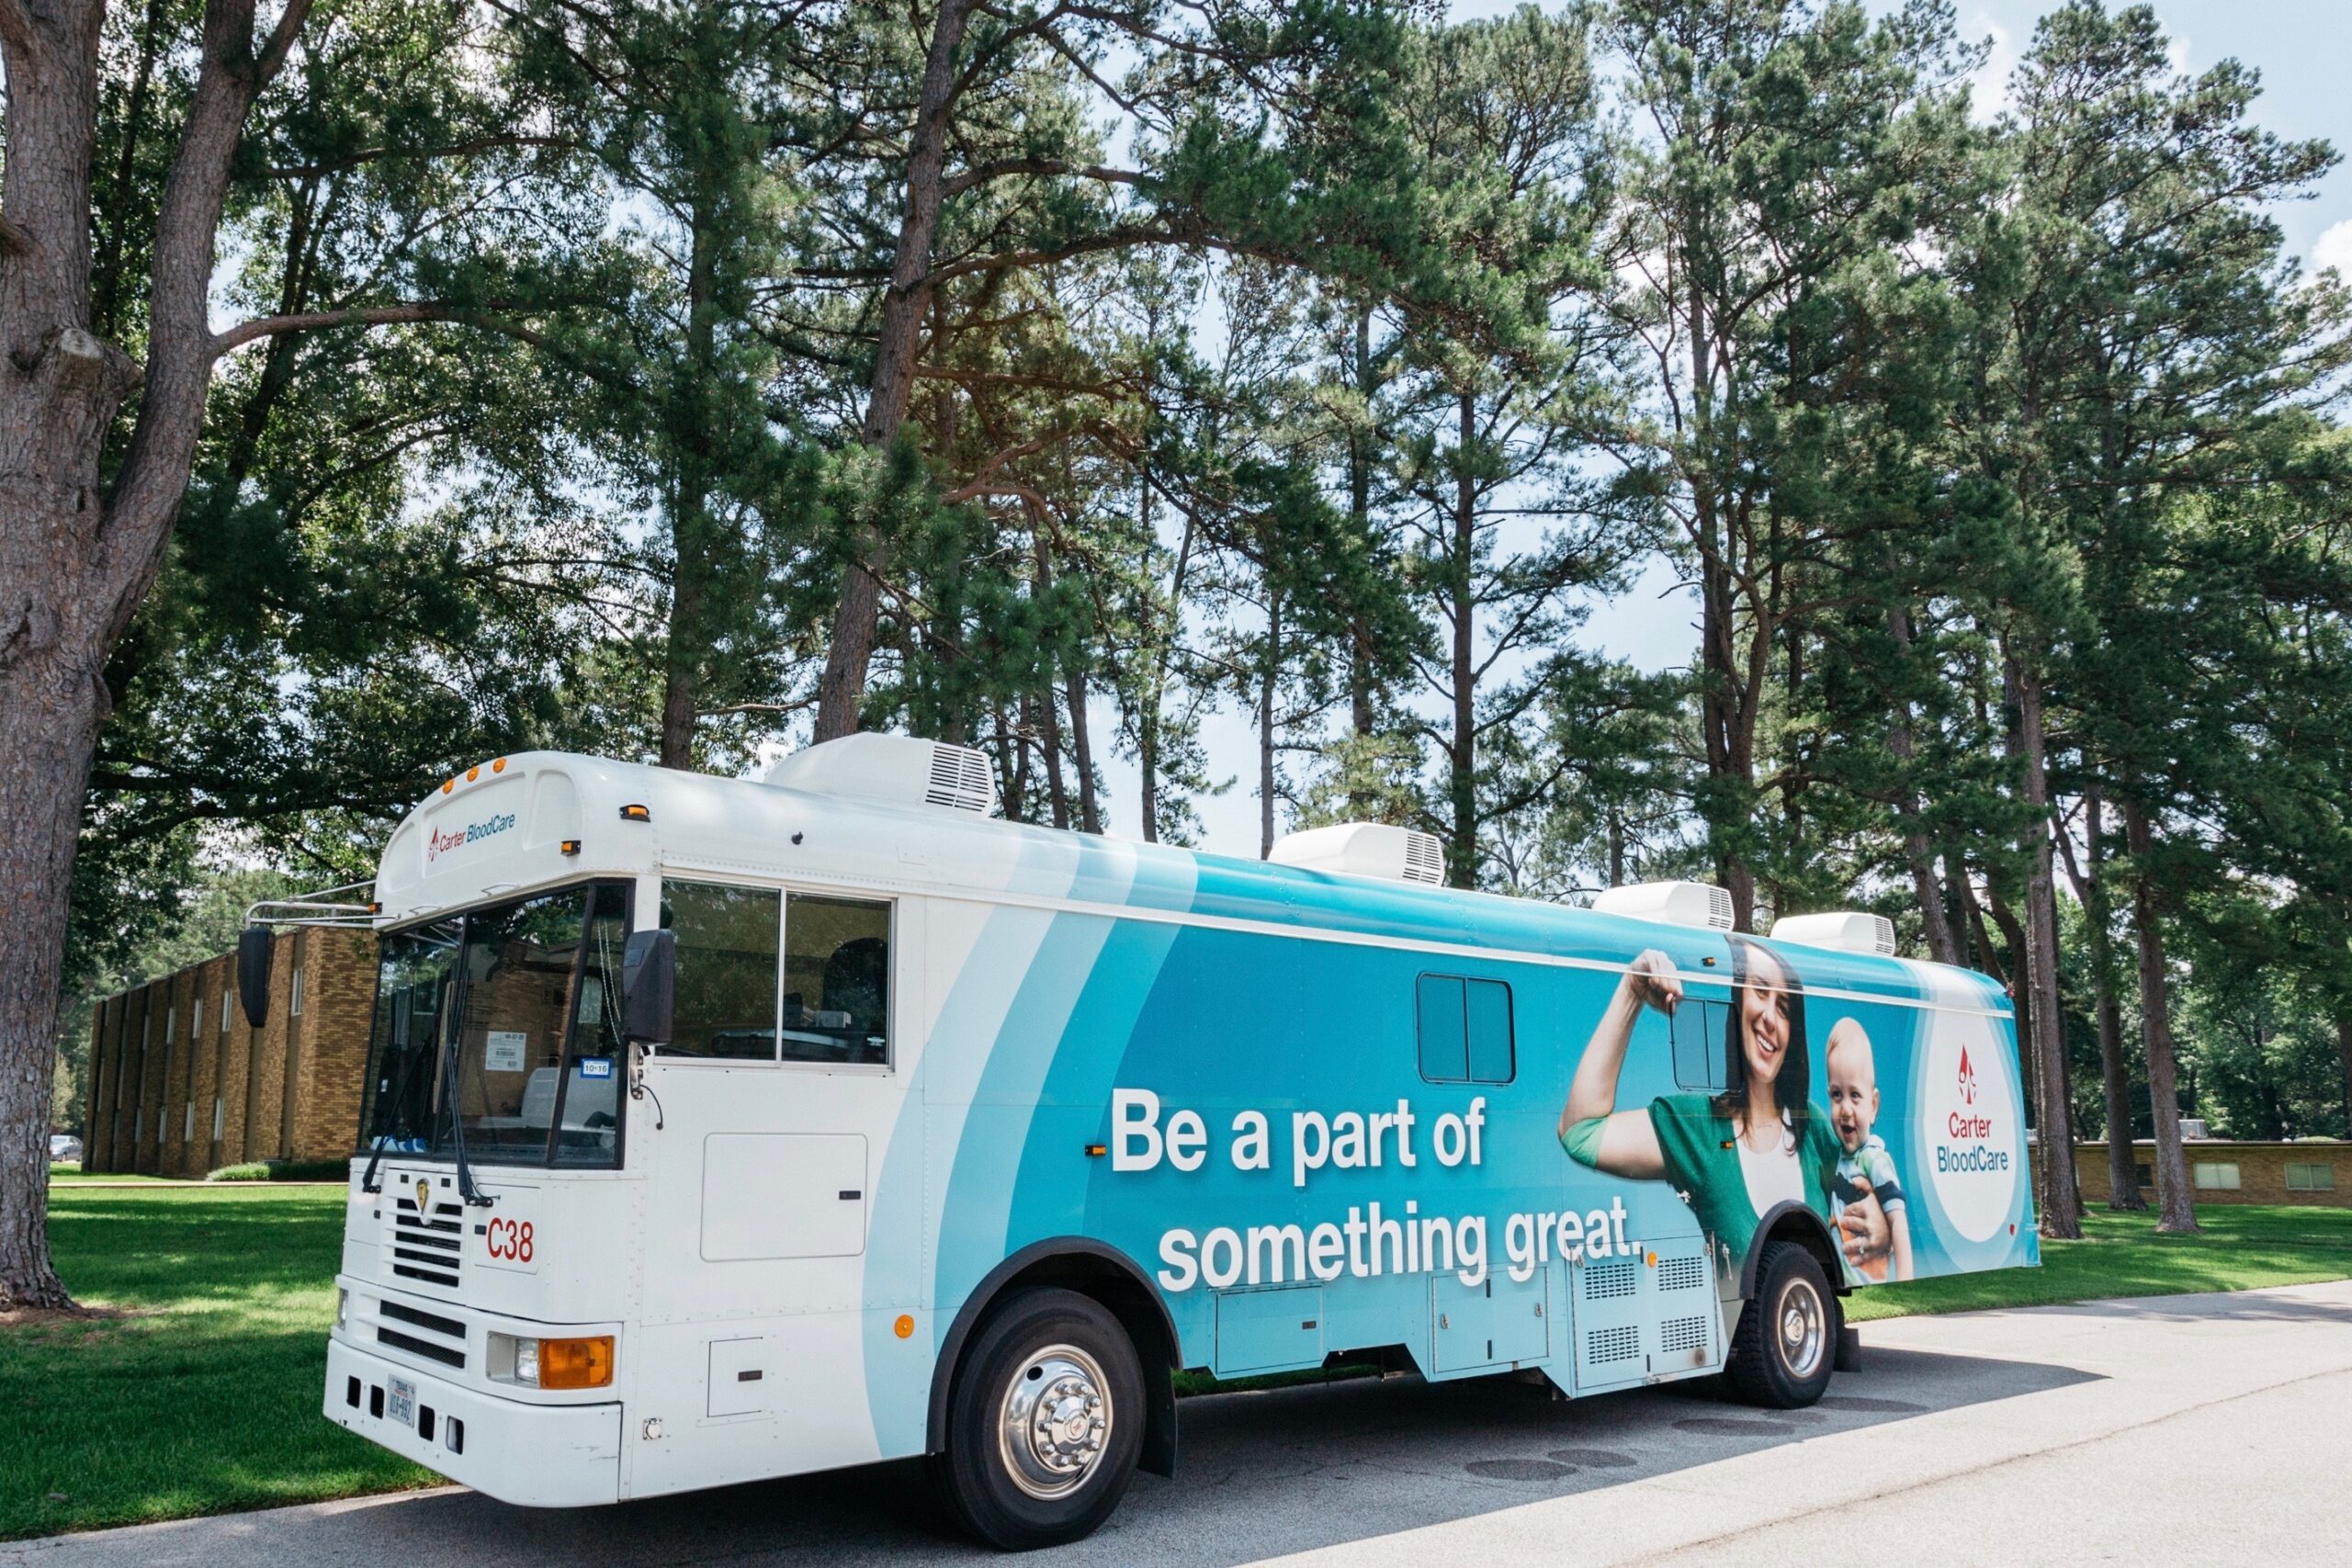 Carter BloodCare mobile